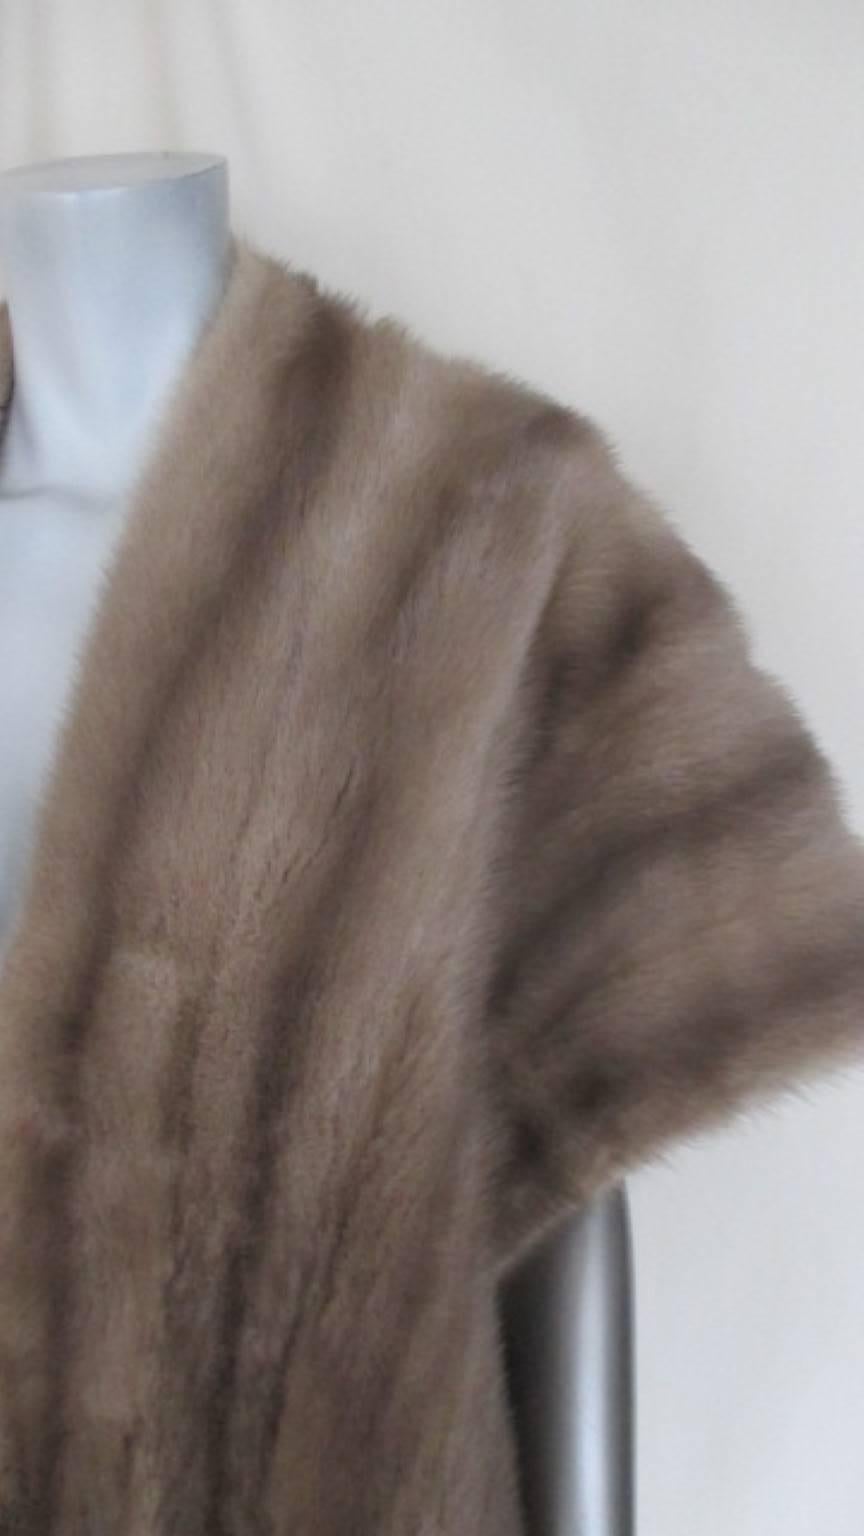 This stole is made of soft quality mink fur.
Its light to wear and in excellent vintage condition.
Silverblue Mink is a grey mink with slight brown shading. Production volume is lower than the brown types.
At the lining has some minimum wear. see